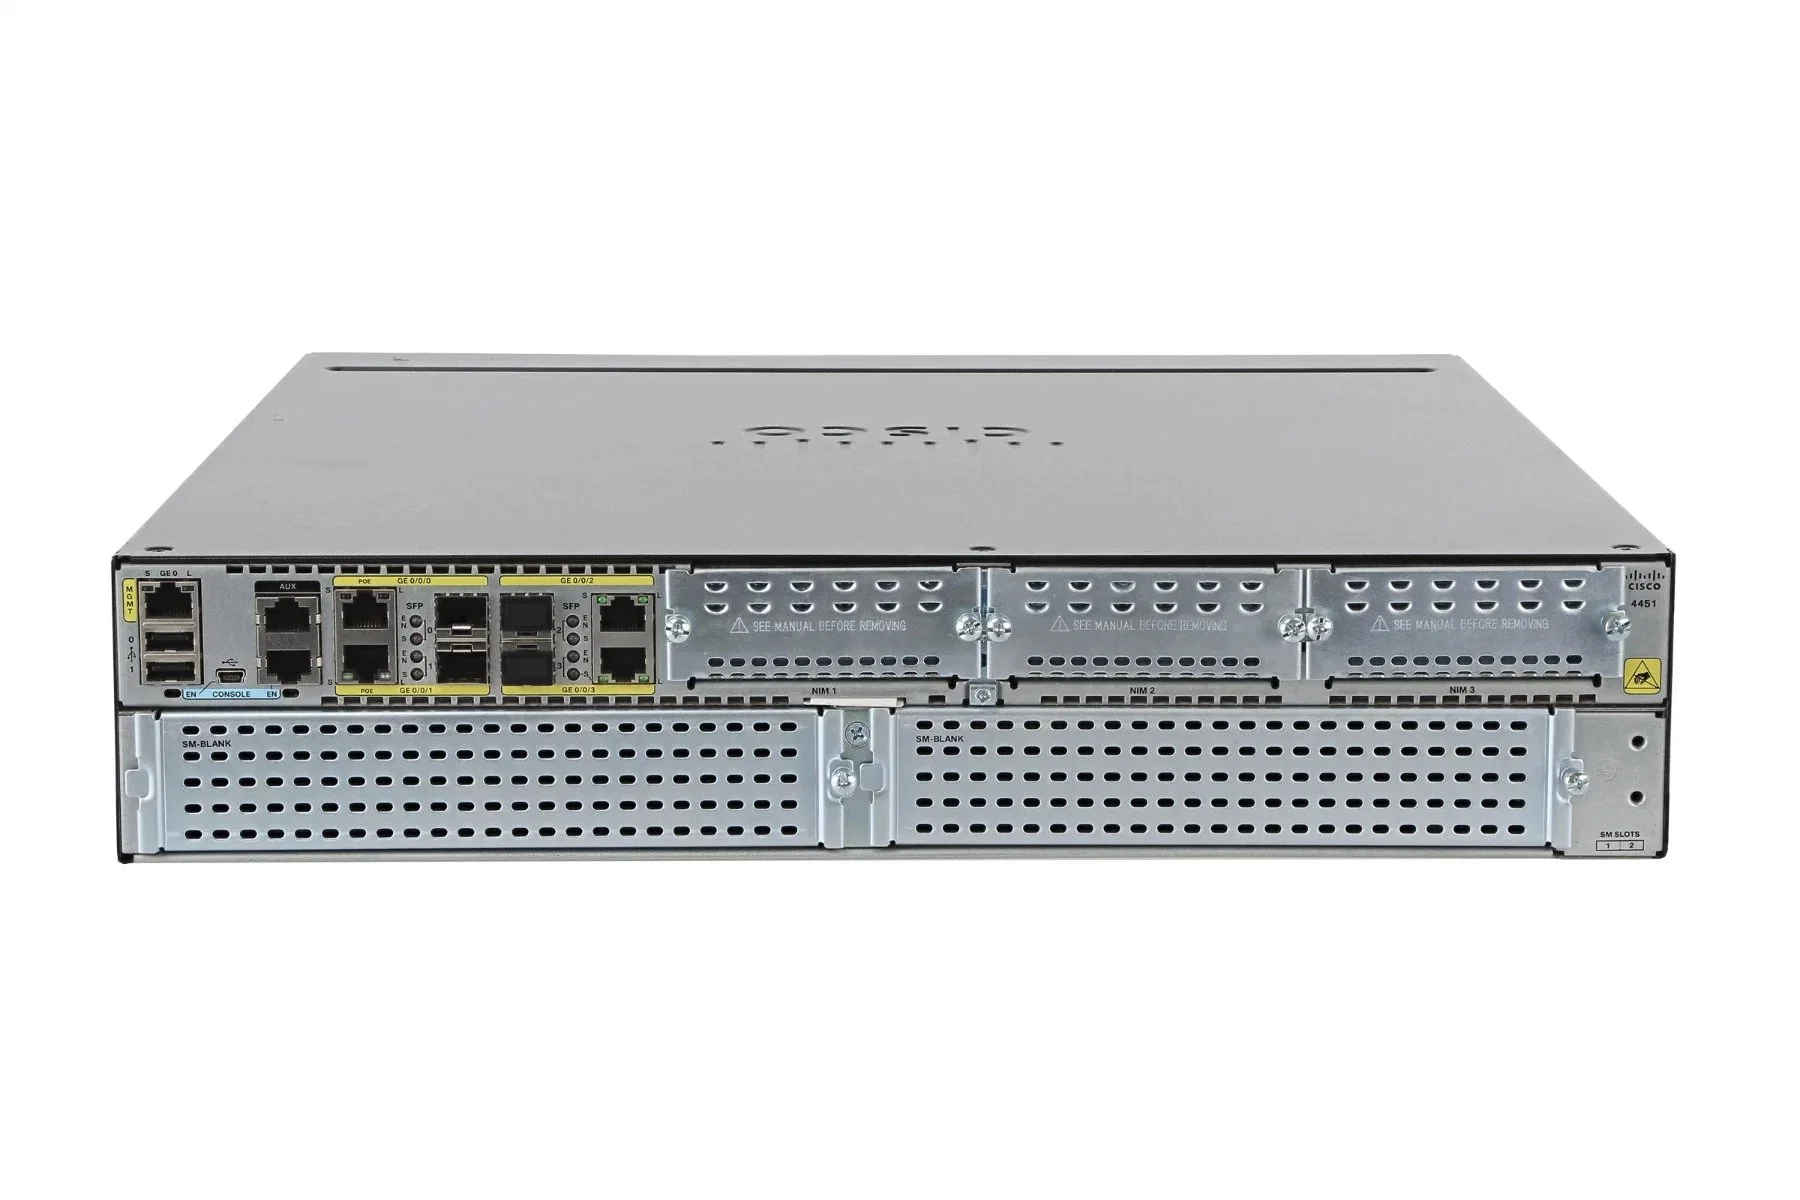 Original New Cisco Router Isr 4451 Integrated Services Router Isr4451-X/K9